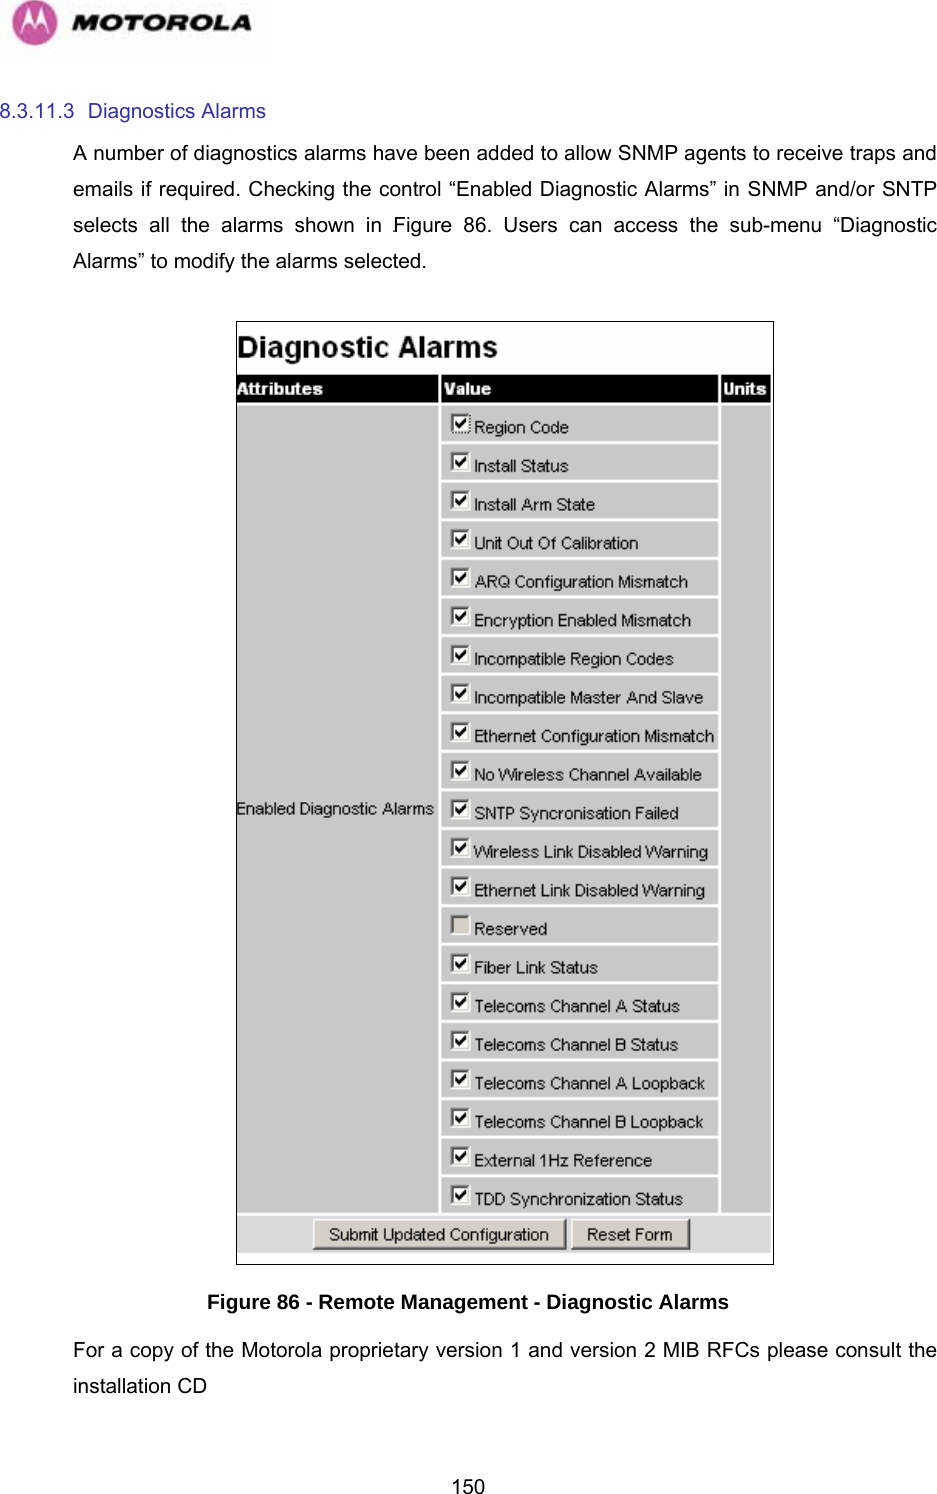   1508.3.11.3 Diagnostics Alarms A number of diagnostics alarms have been added to allow SNMP agents to receive traps and emails if required. Checking the control “Enabled Diagnostic Alarms” in SNMP and/or SNTP selects all the alarms shown in 1147HFigure 86. Users can access the sub-menu “Diagnostic Alarms” to modify the alarms selected.    Figure 86 - Remote Management - Diagnostic Alarms For a copy of the Motorola proprietary version 1 and version 2 MIB RFCs please consult the installation CD 